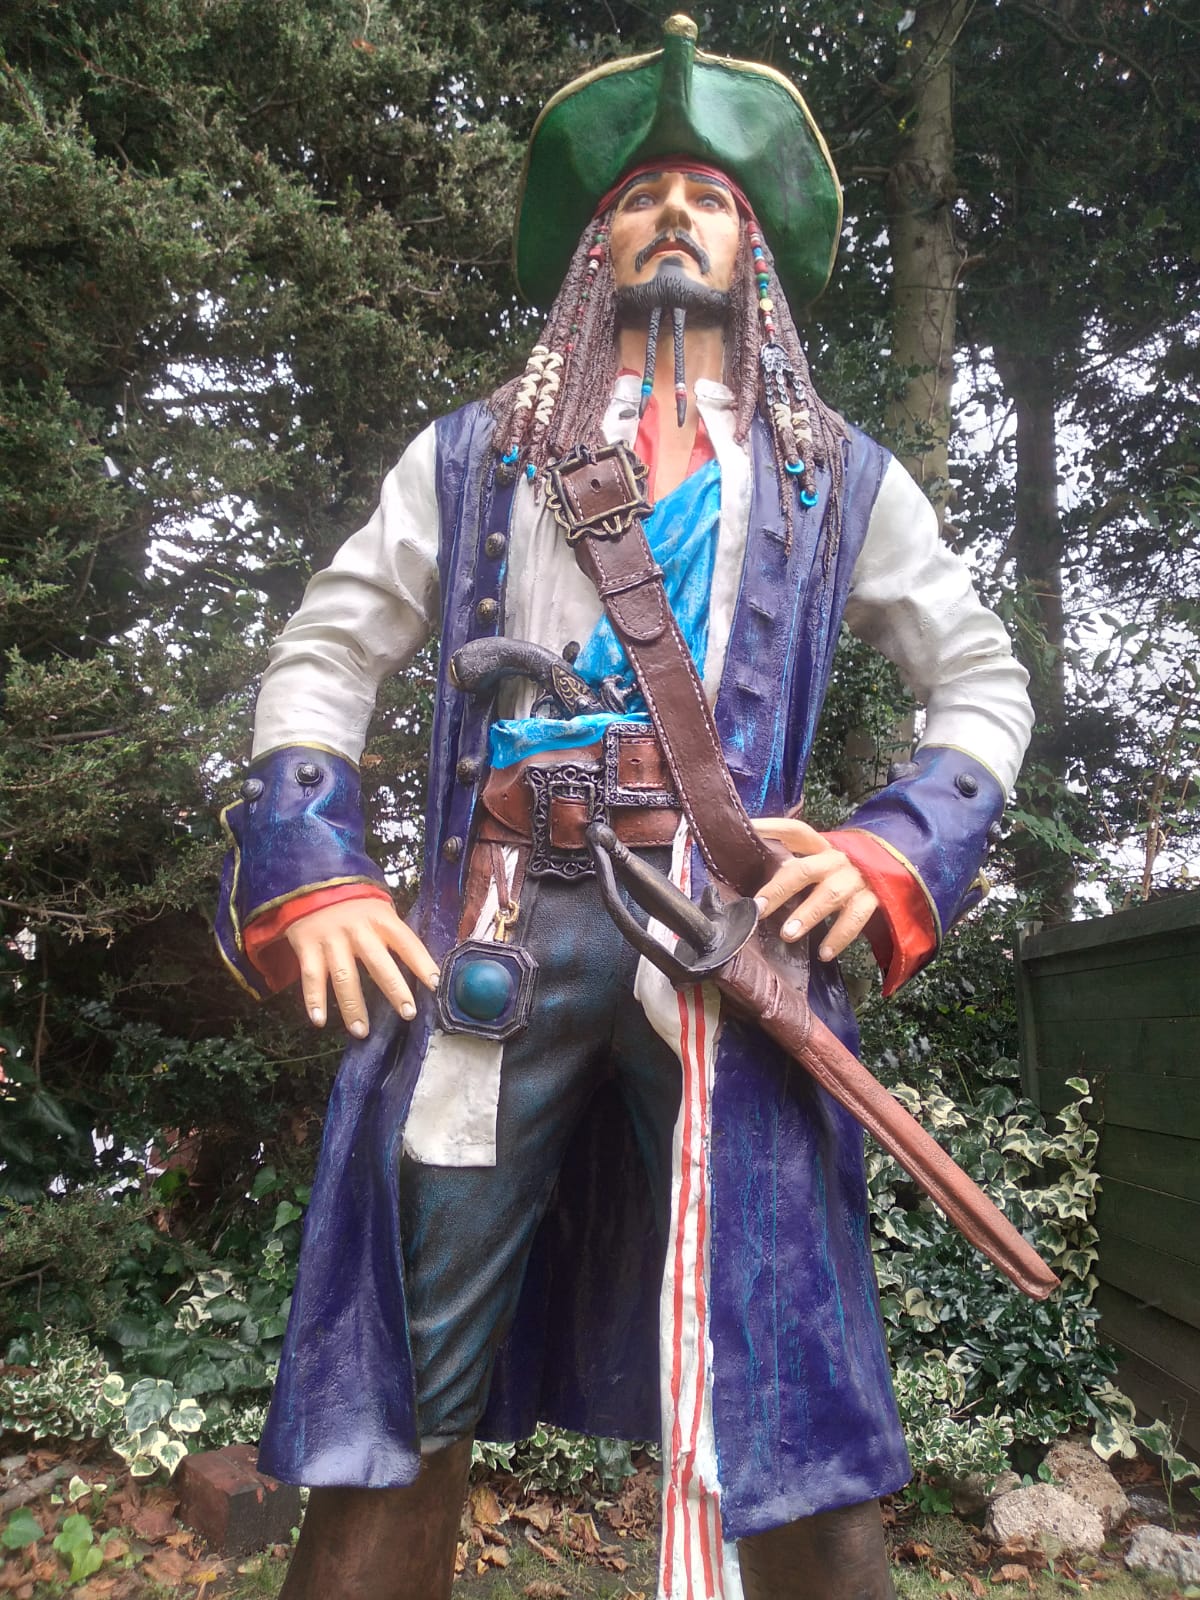 WITHDRAWN DUE TO DAMAGE IN TRANSIT Cinema - Statue of the Caribbean pirate Jack Sparr - Image 3 of 11